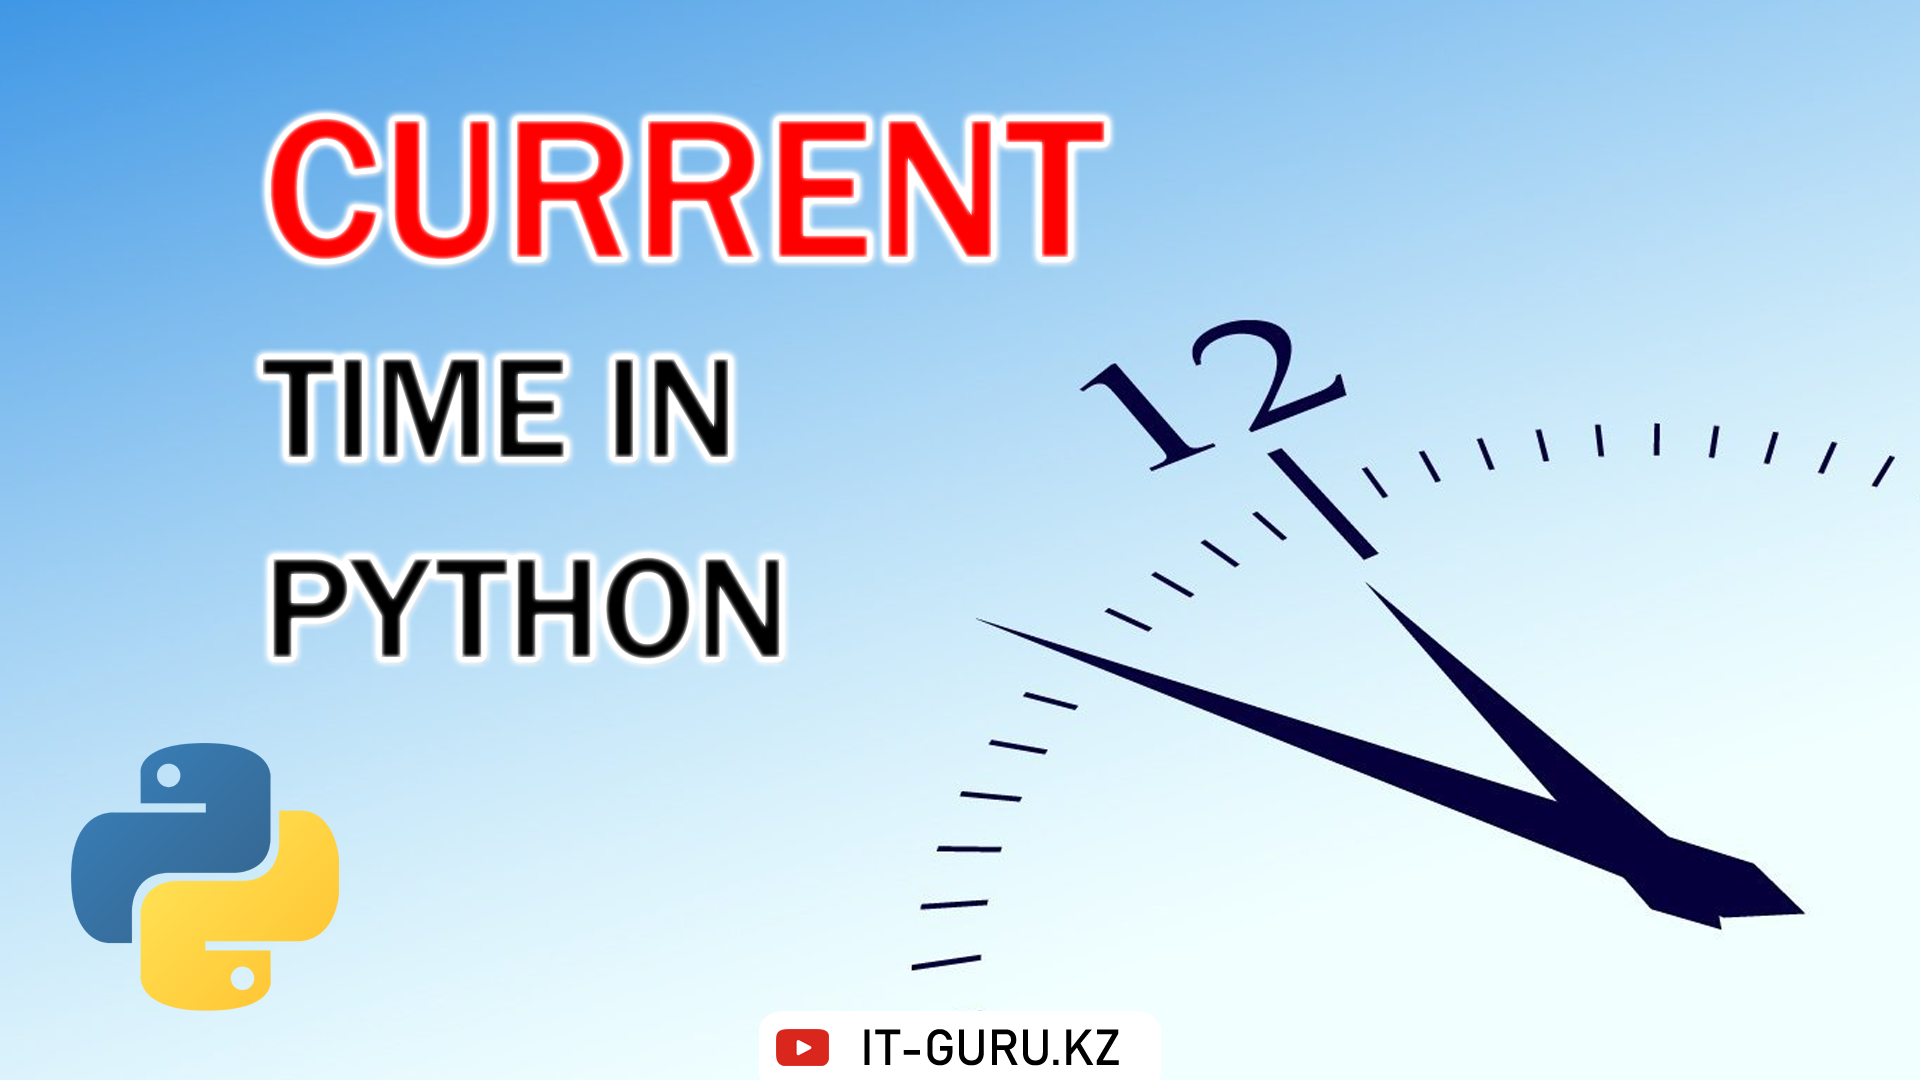 How to get the current time in Python?